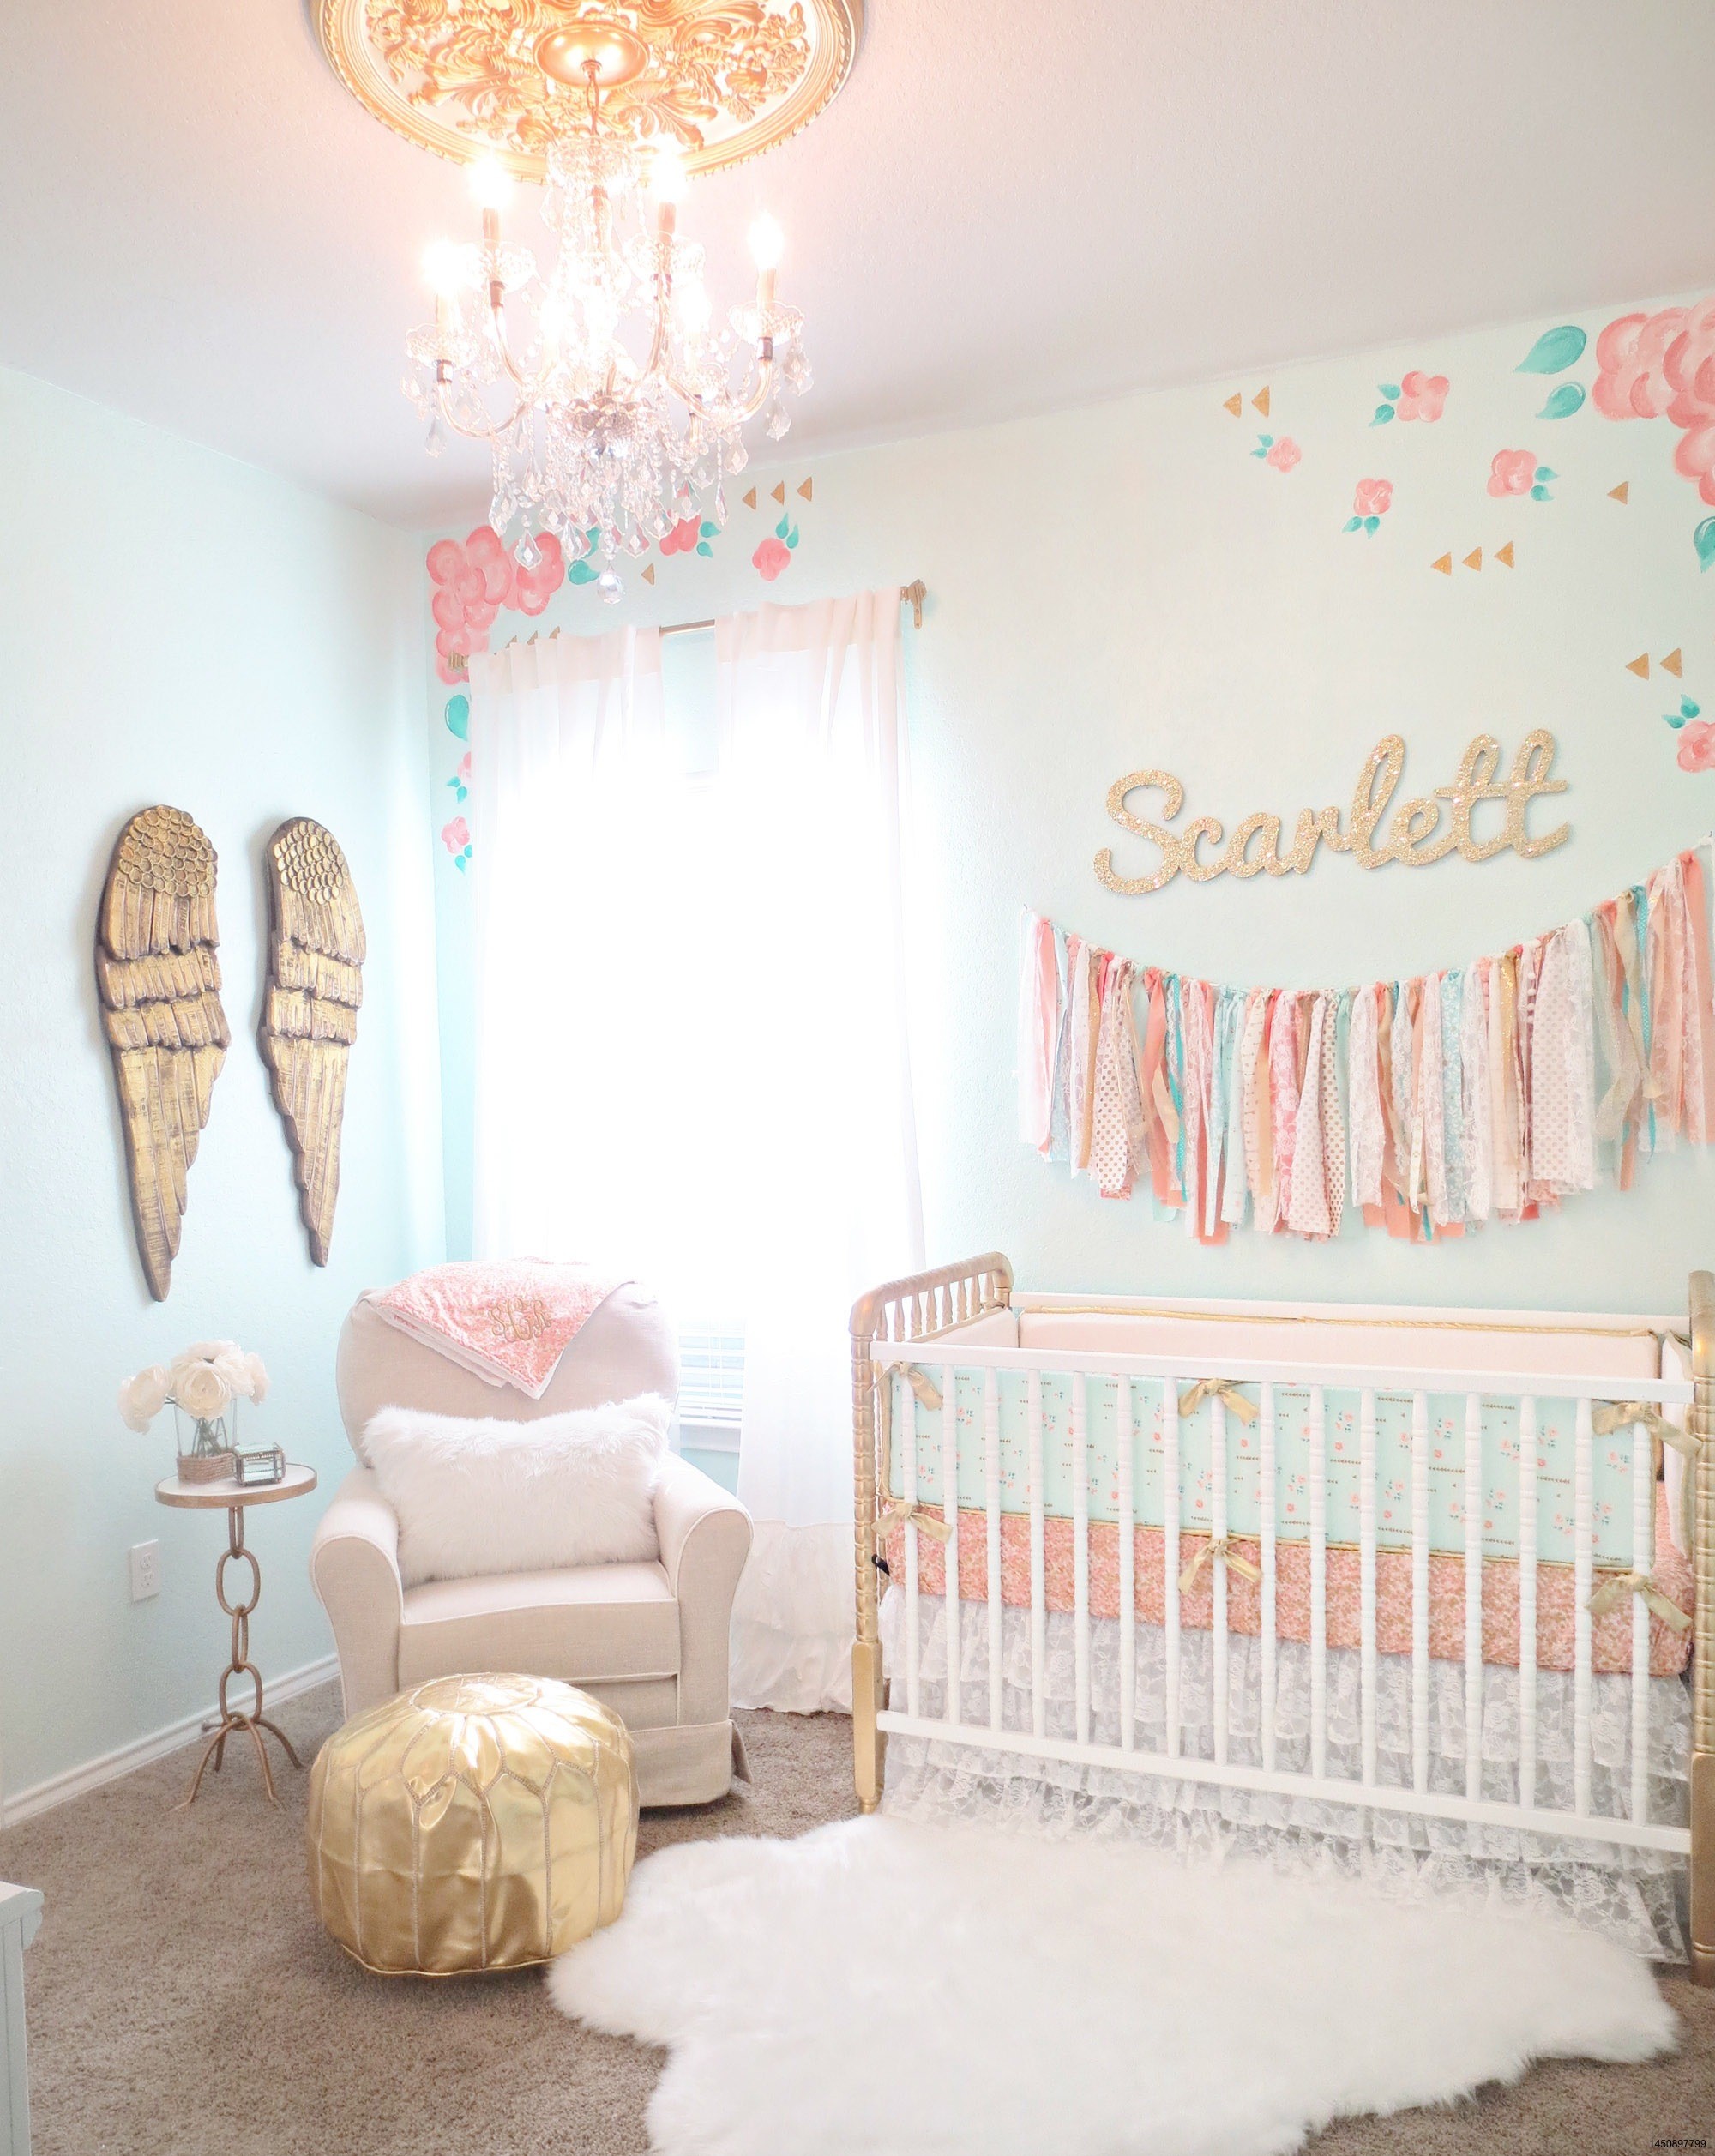 Bedroom. Magnificent Vintage Baby Wall Design Ideas Introduce Admirable Flowers Girl Vintage Wallpaper With Stunning